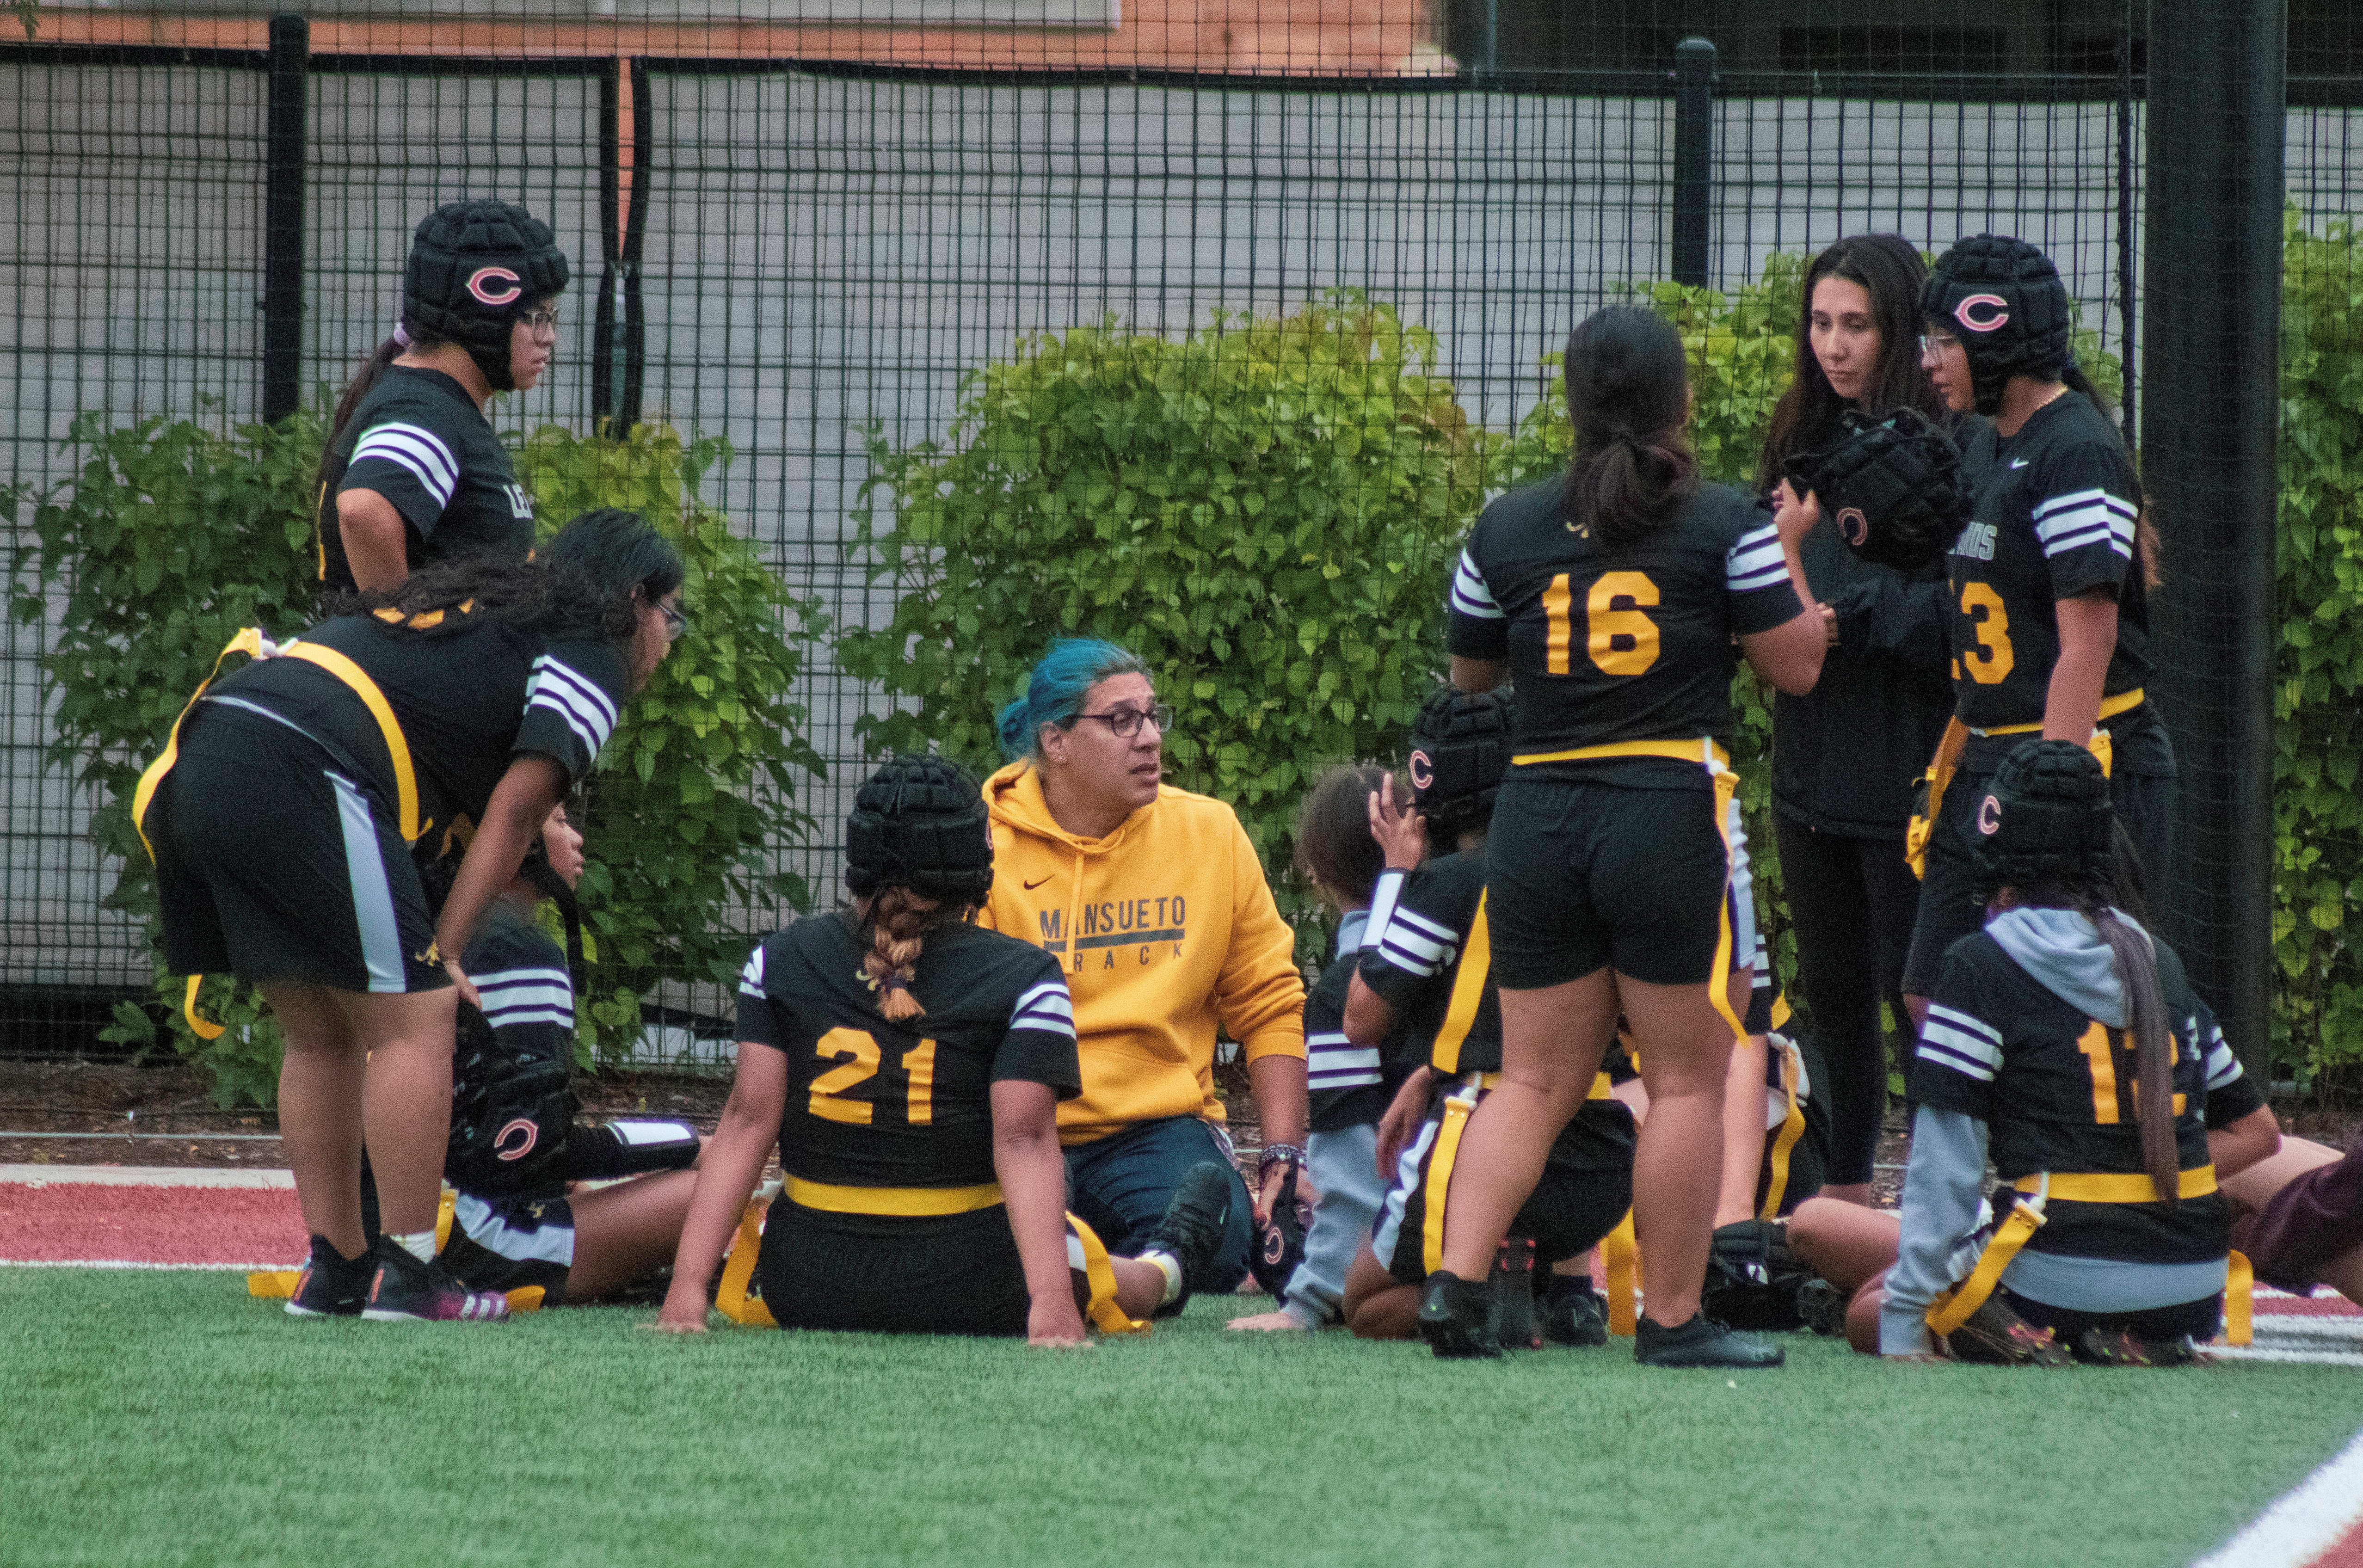 Image shows the Mansueto High Schools girls' flag football team gathered on the field with their coaches.